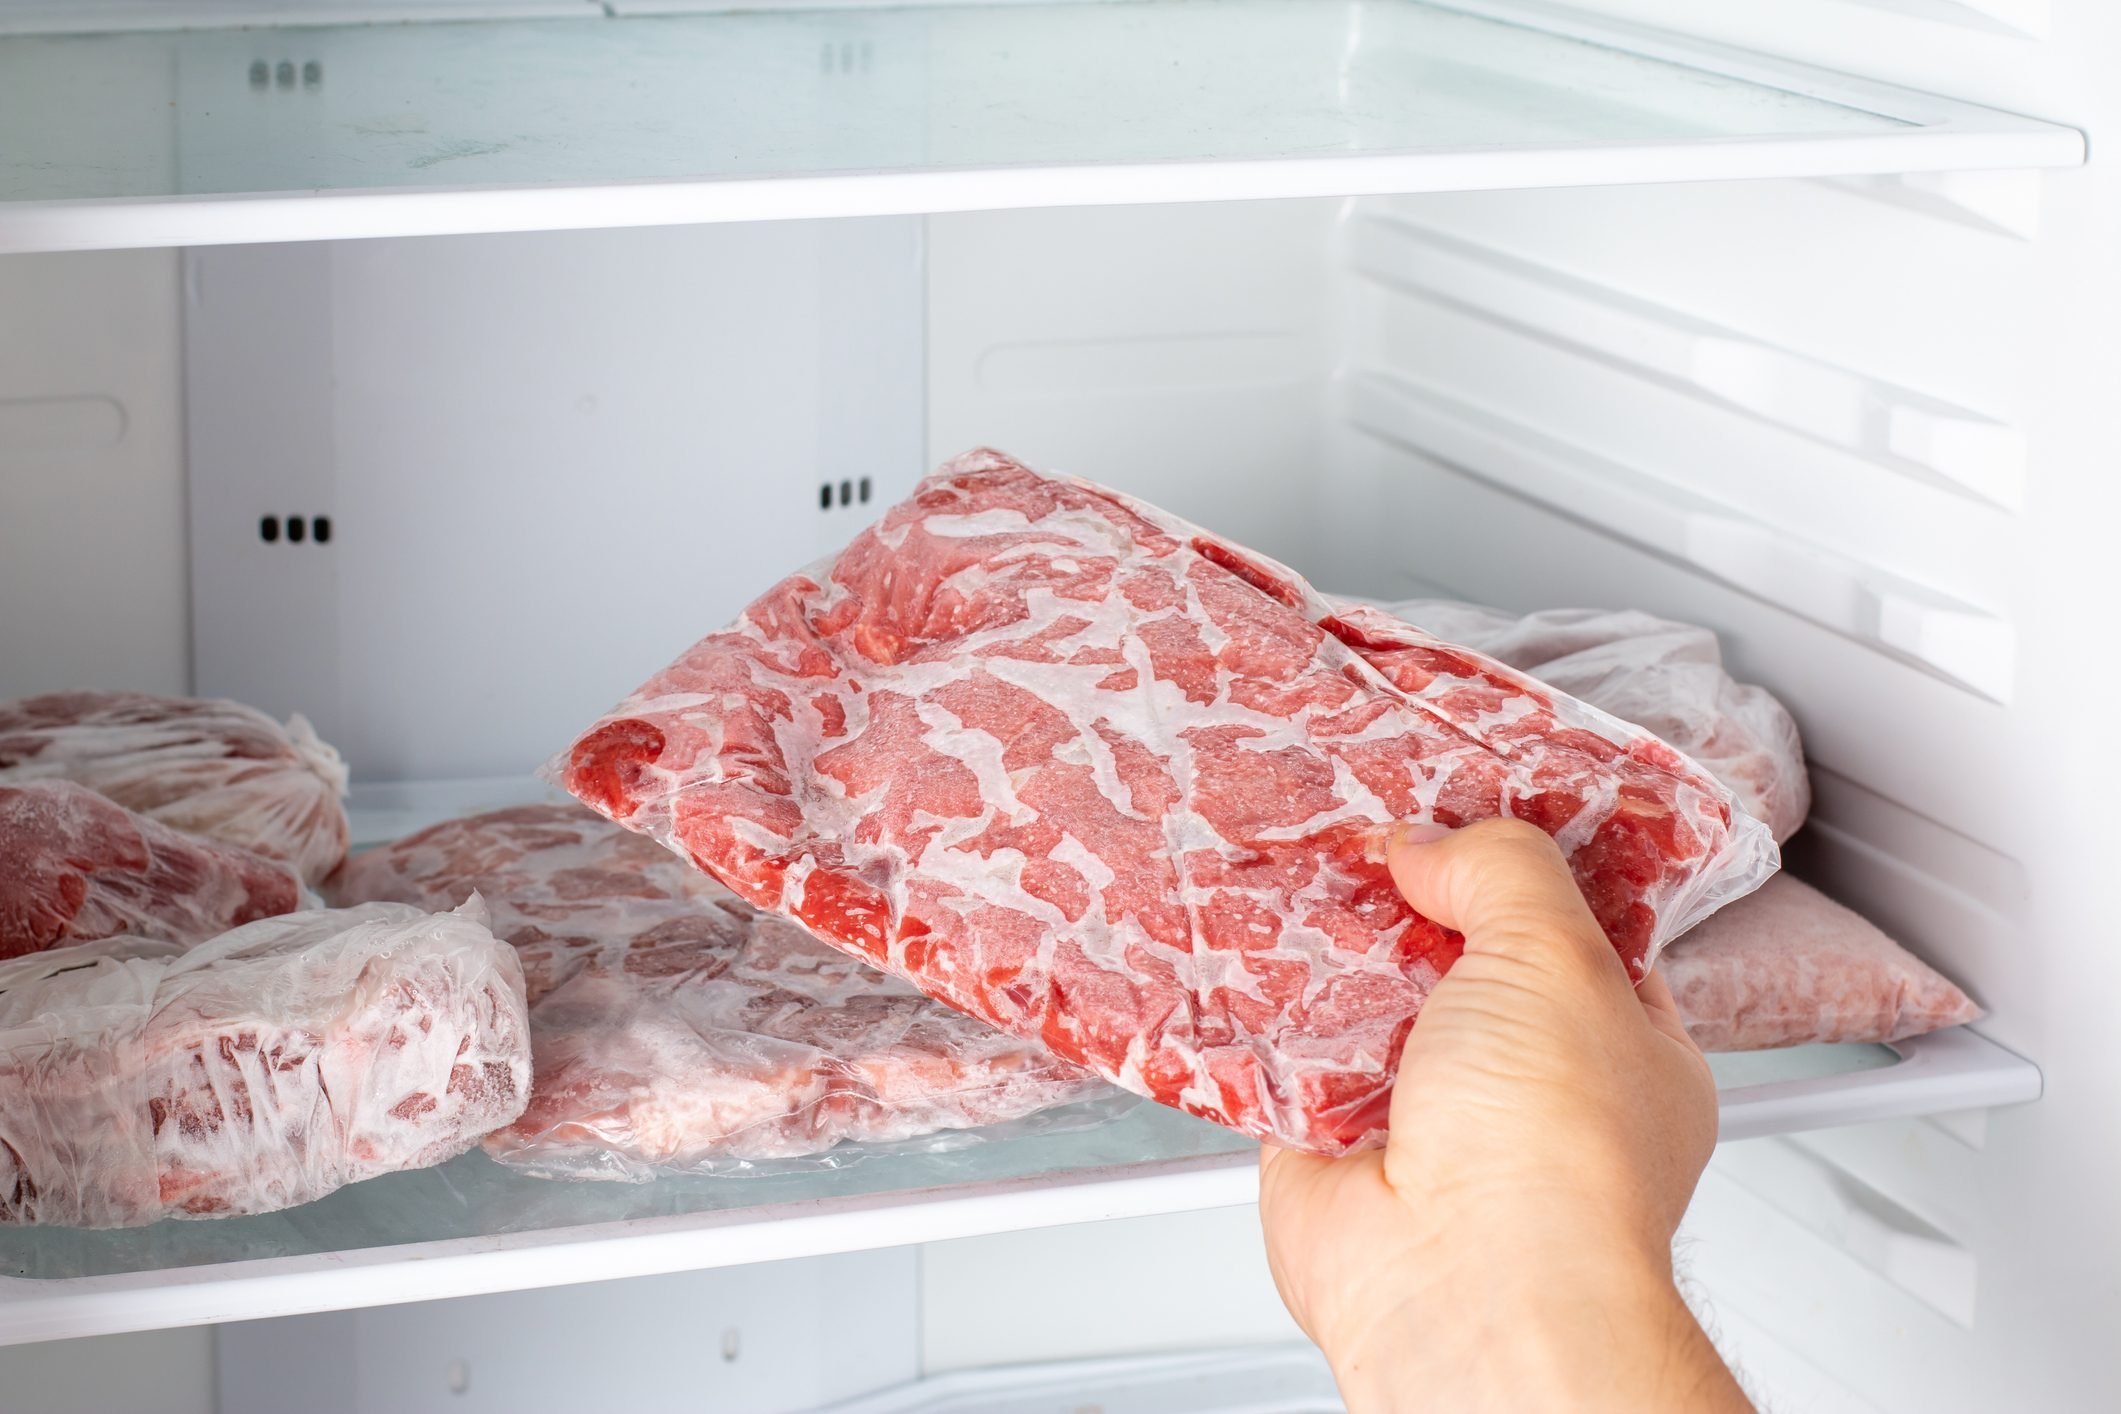 How to store beef in the refrigerator